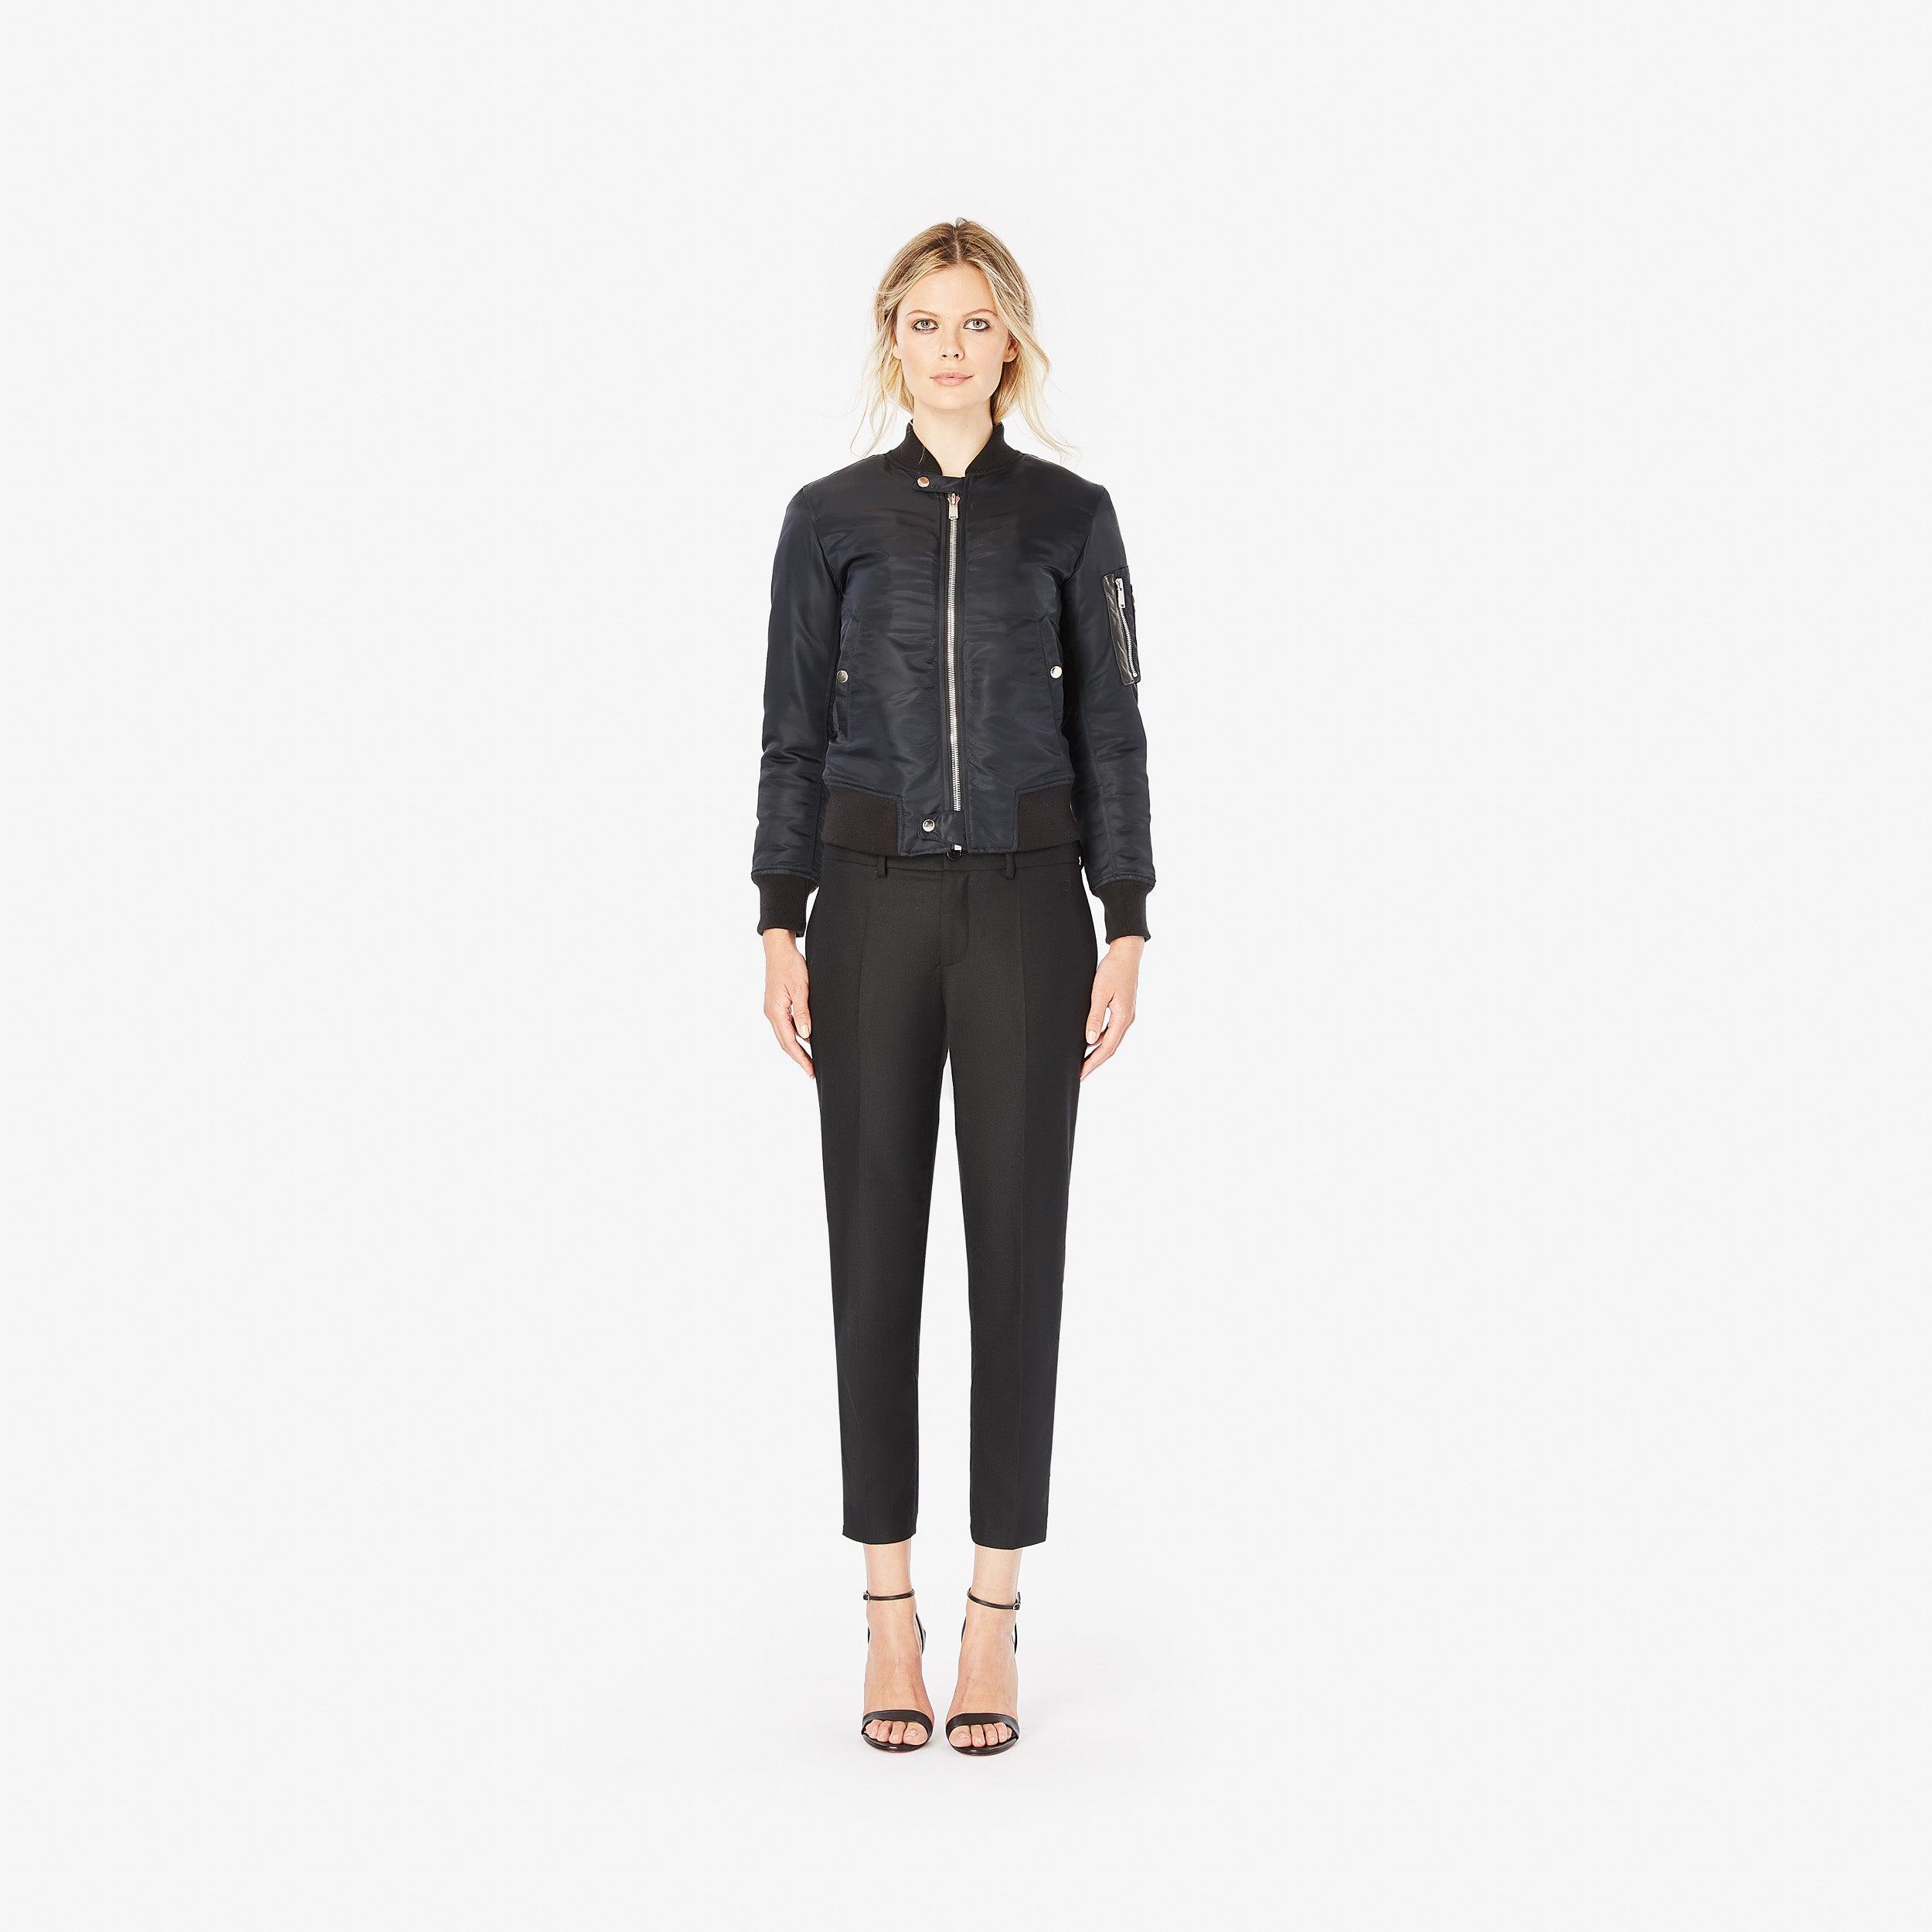 Classic Bomber Jacket Embroidered - Panayiota, P-WRS1-BOMBER-BLK-XS